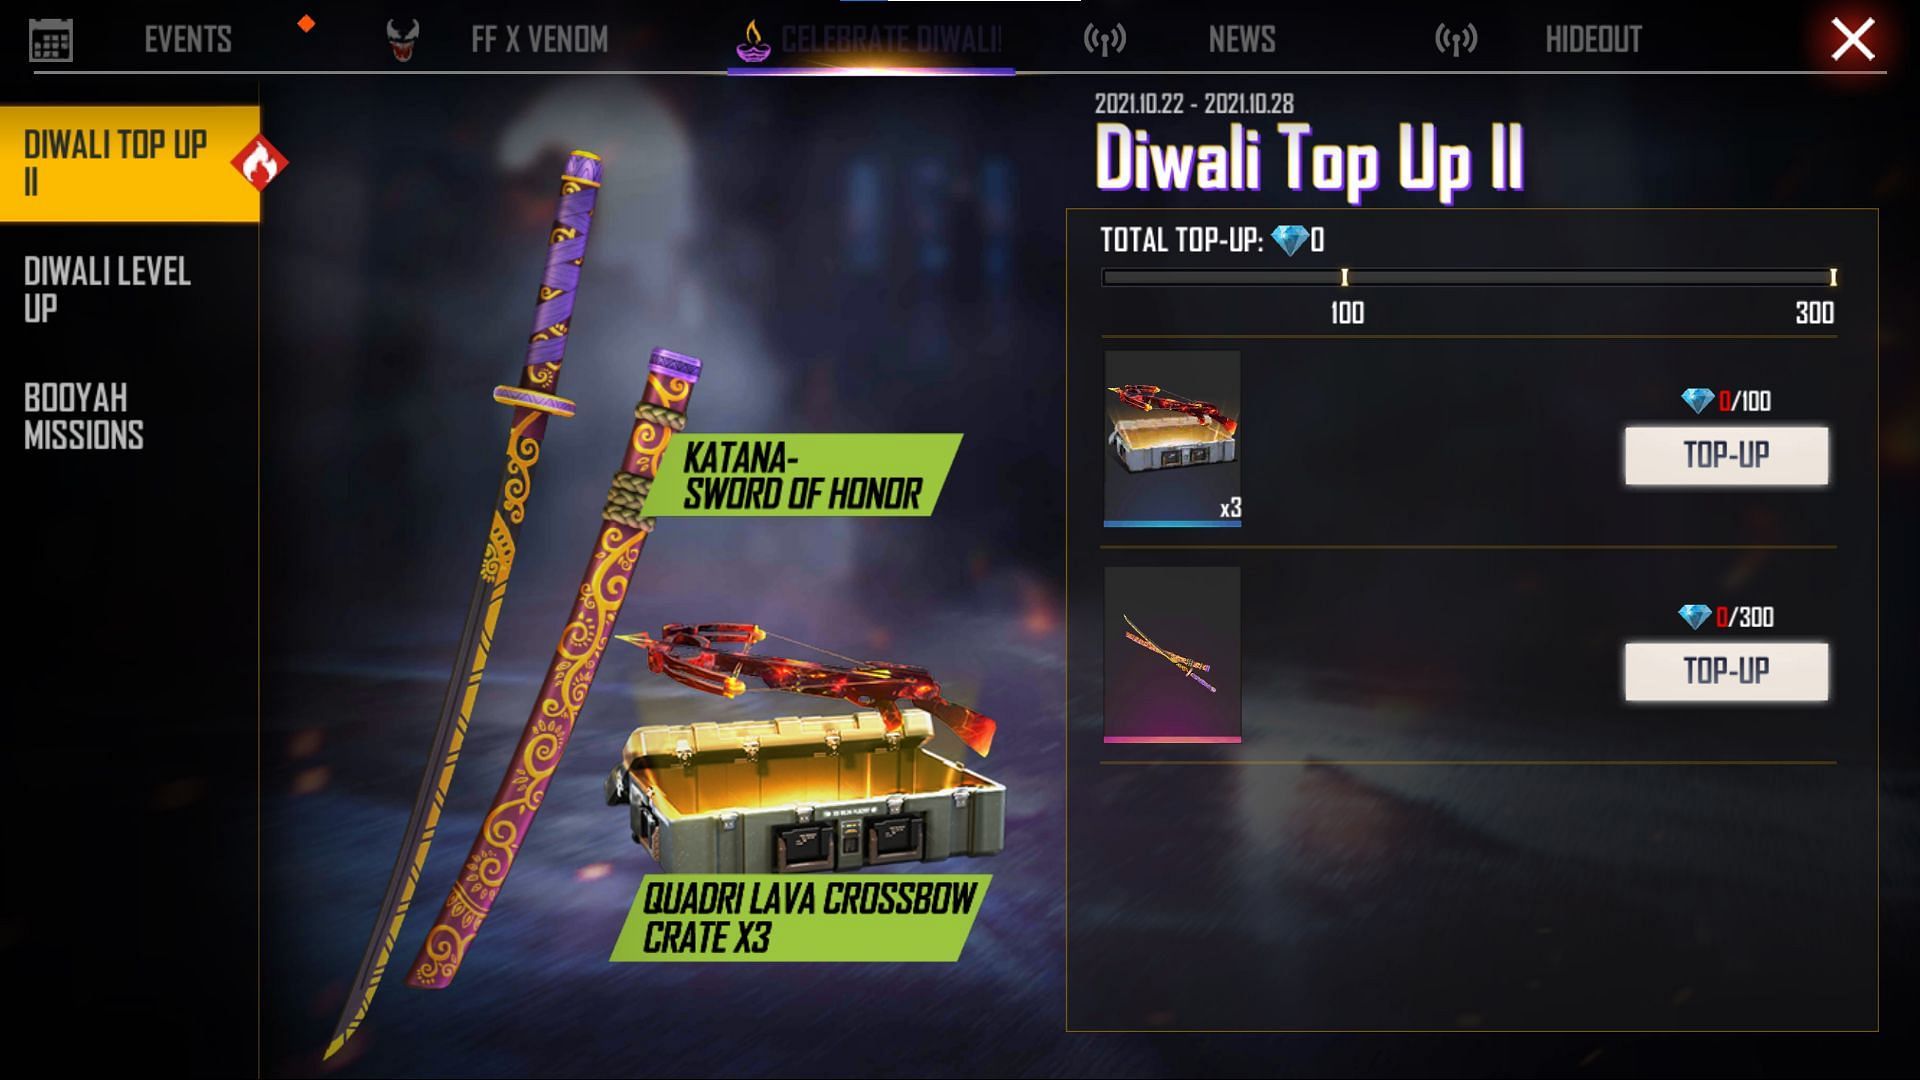 To get these, players must purchase a given amount of diamonds (Image via Free Fire)